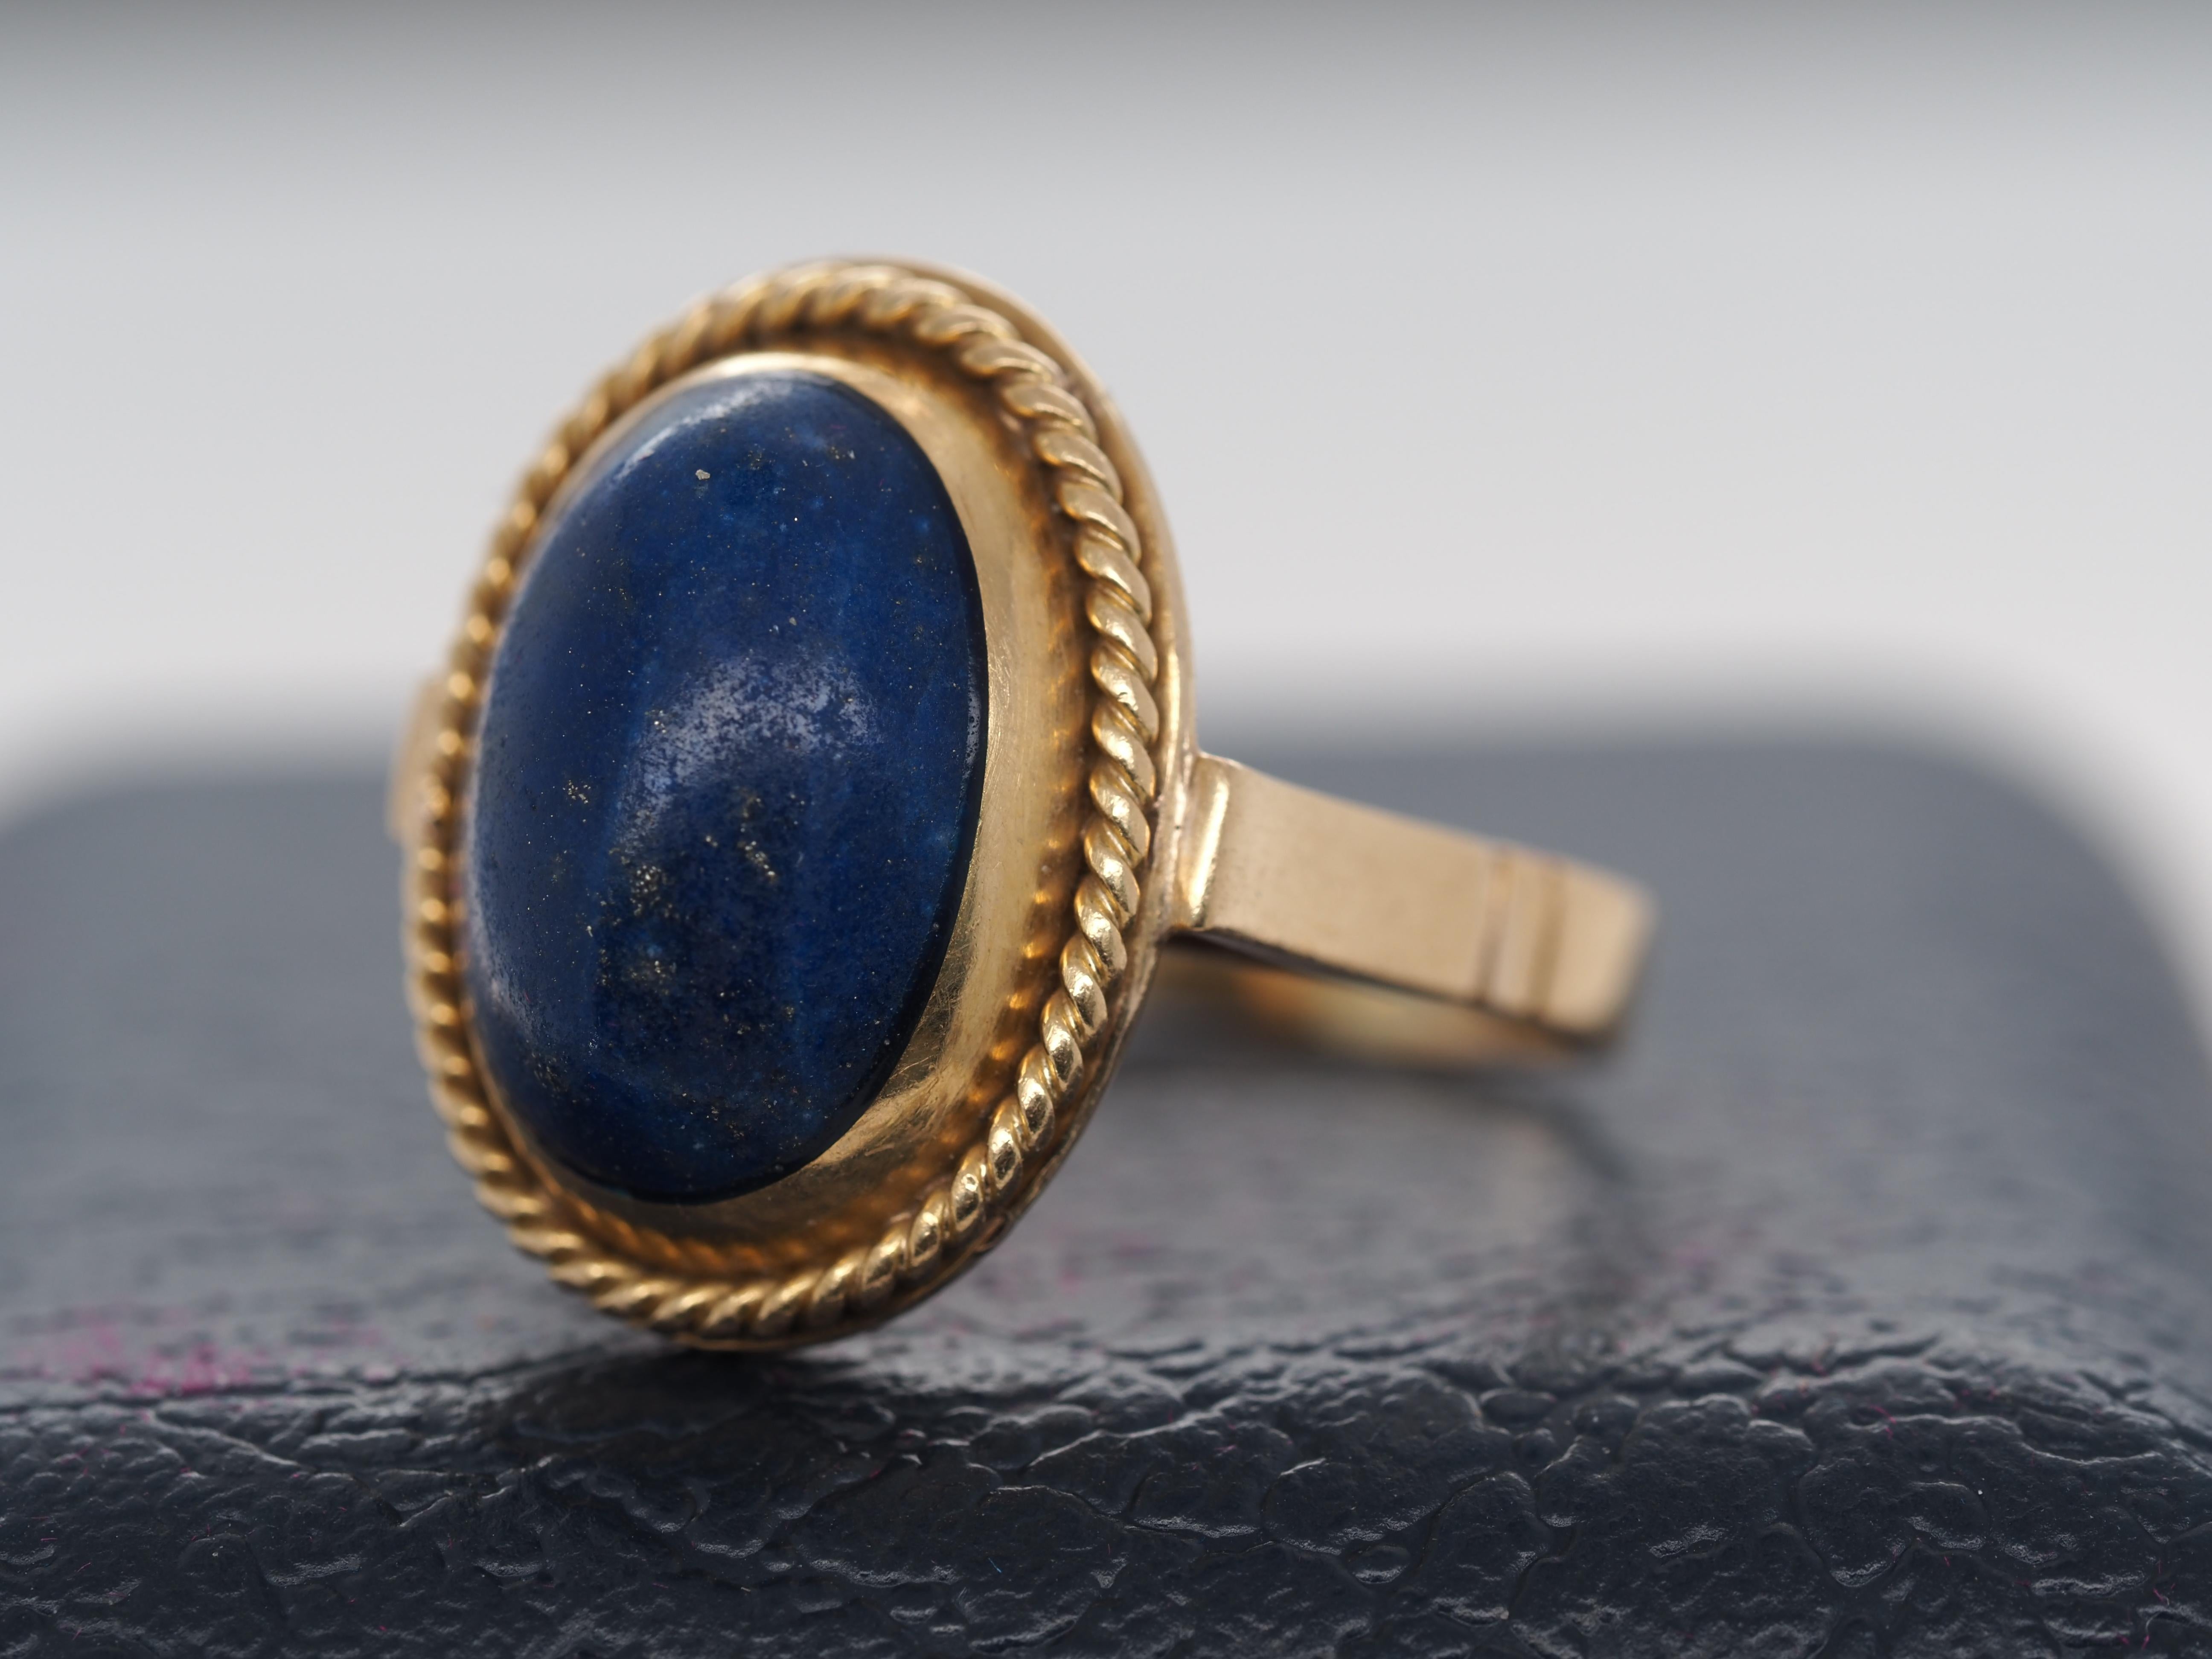 19k Yellow Gold Vintage Oval Shape Lapis Ring For Sale 1